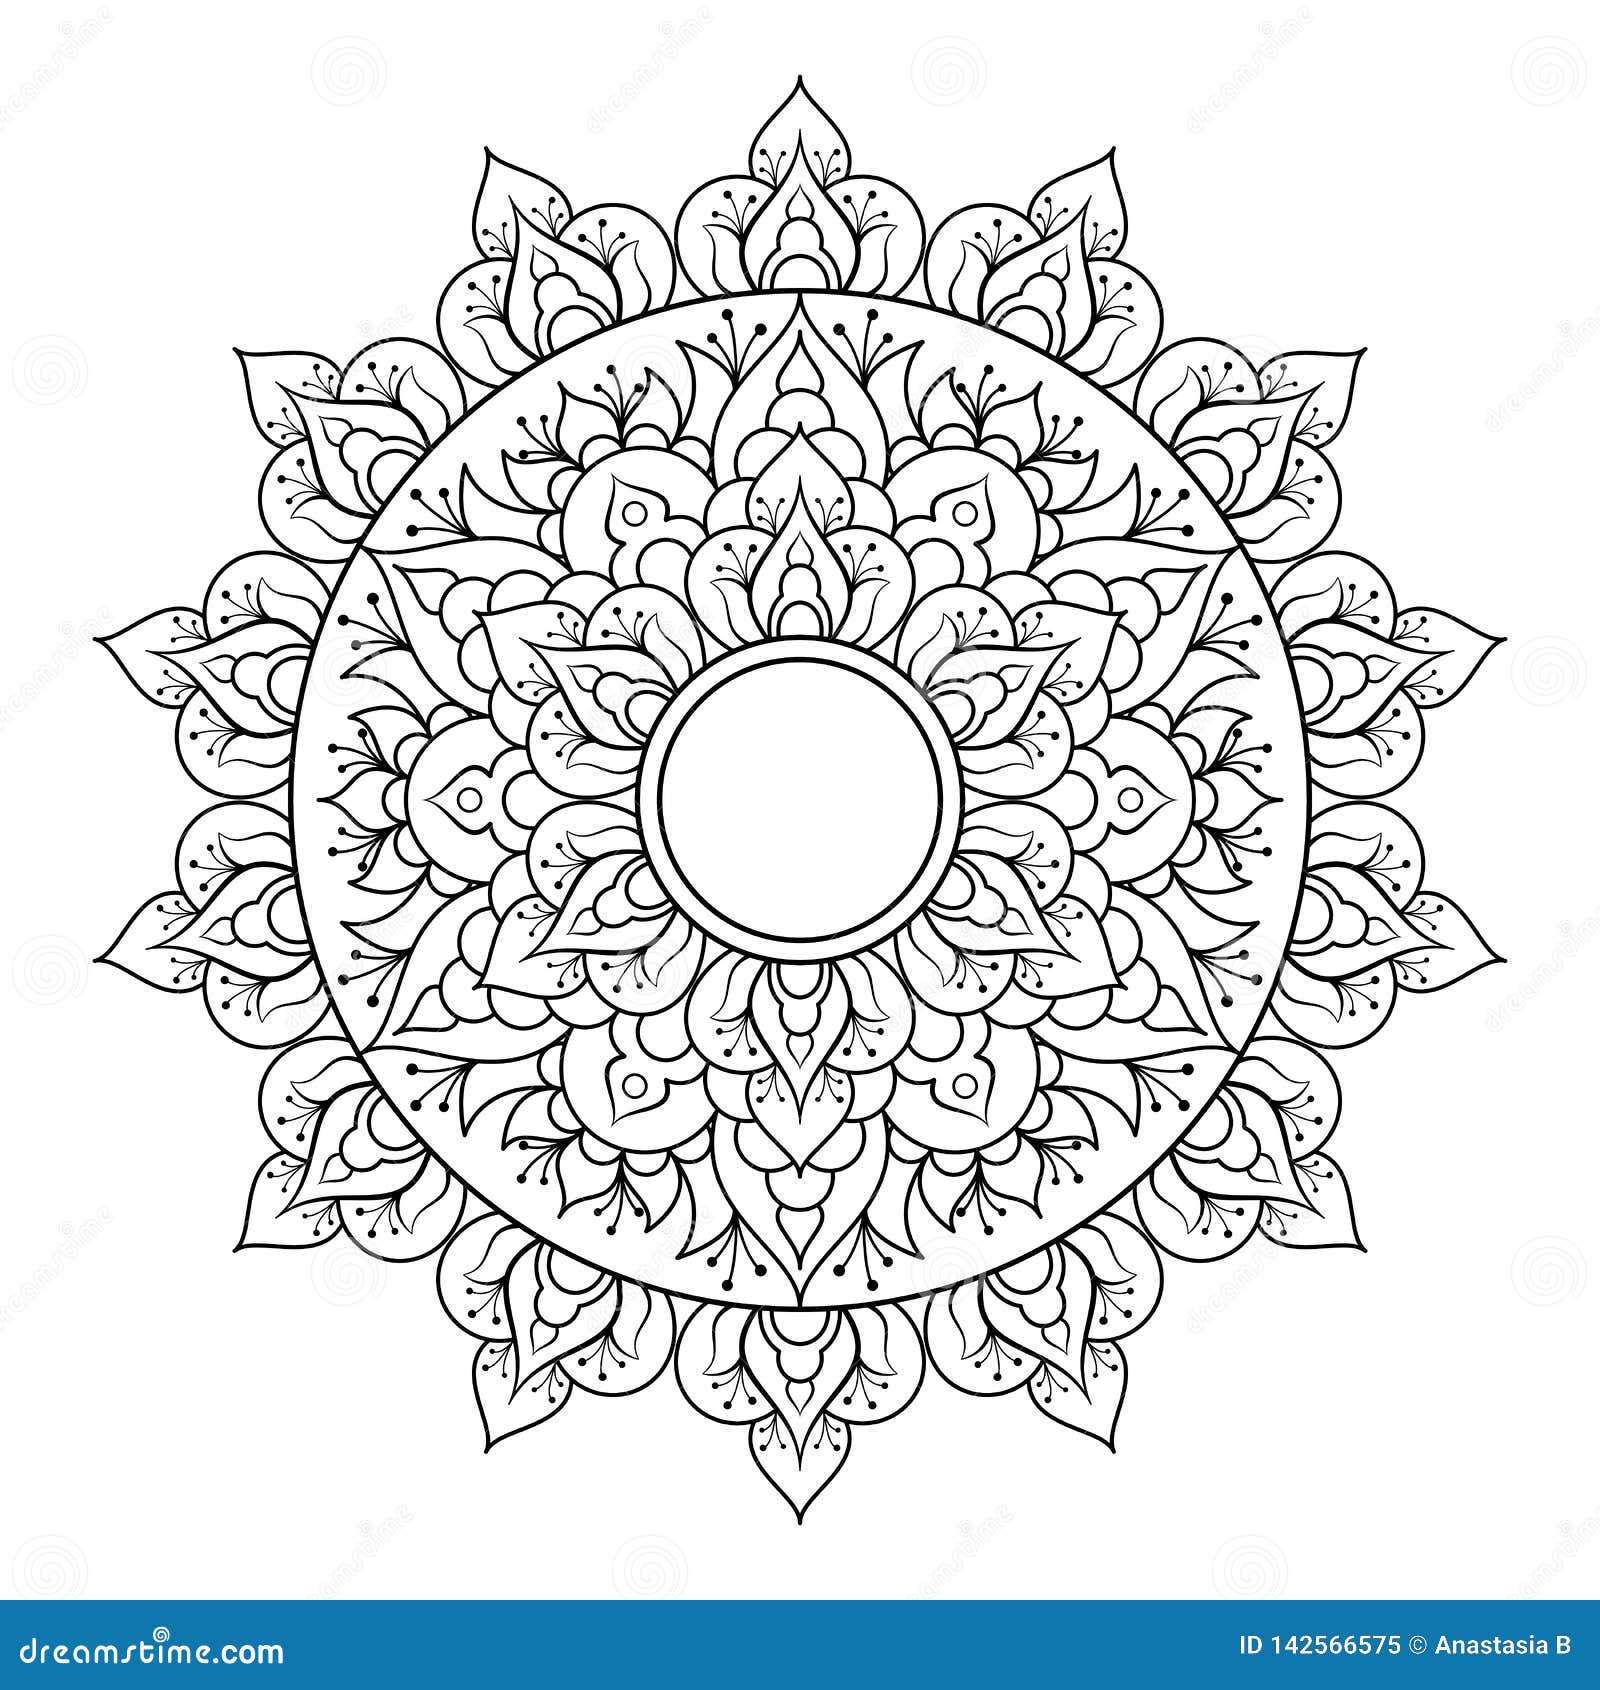 Download Decorative Ethnic Mandala Pattern. Anti-stress Coloring Book Page For Adults. Unusual Flower ...